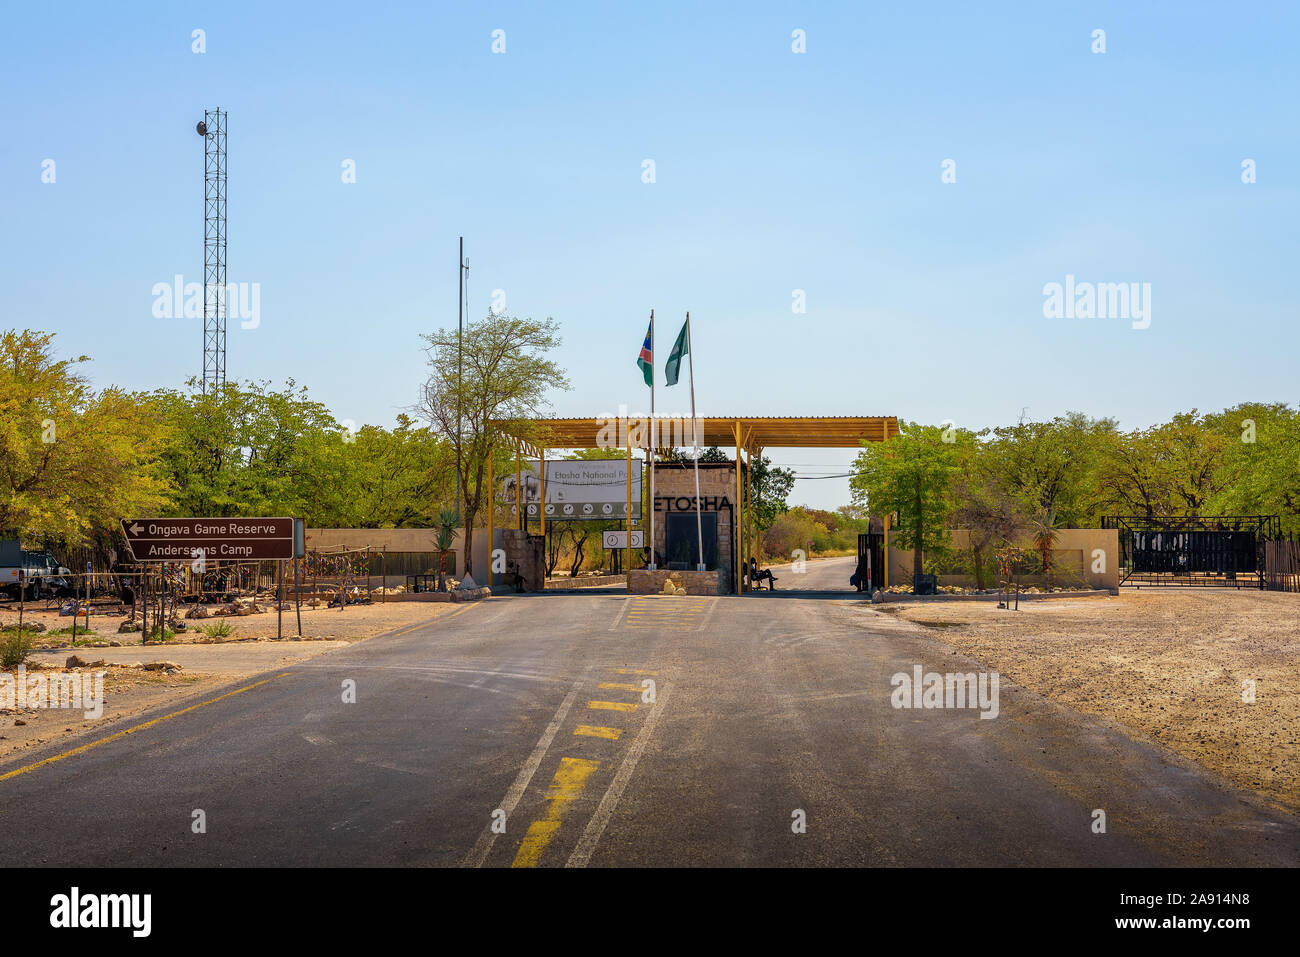 Anderson Gate to Etosha National Park in Namibia and the entrance sign Stock Photo